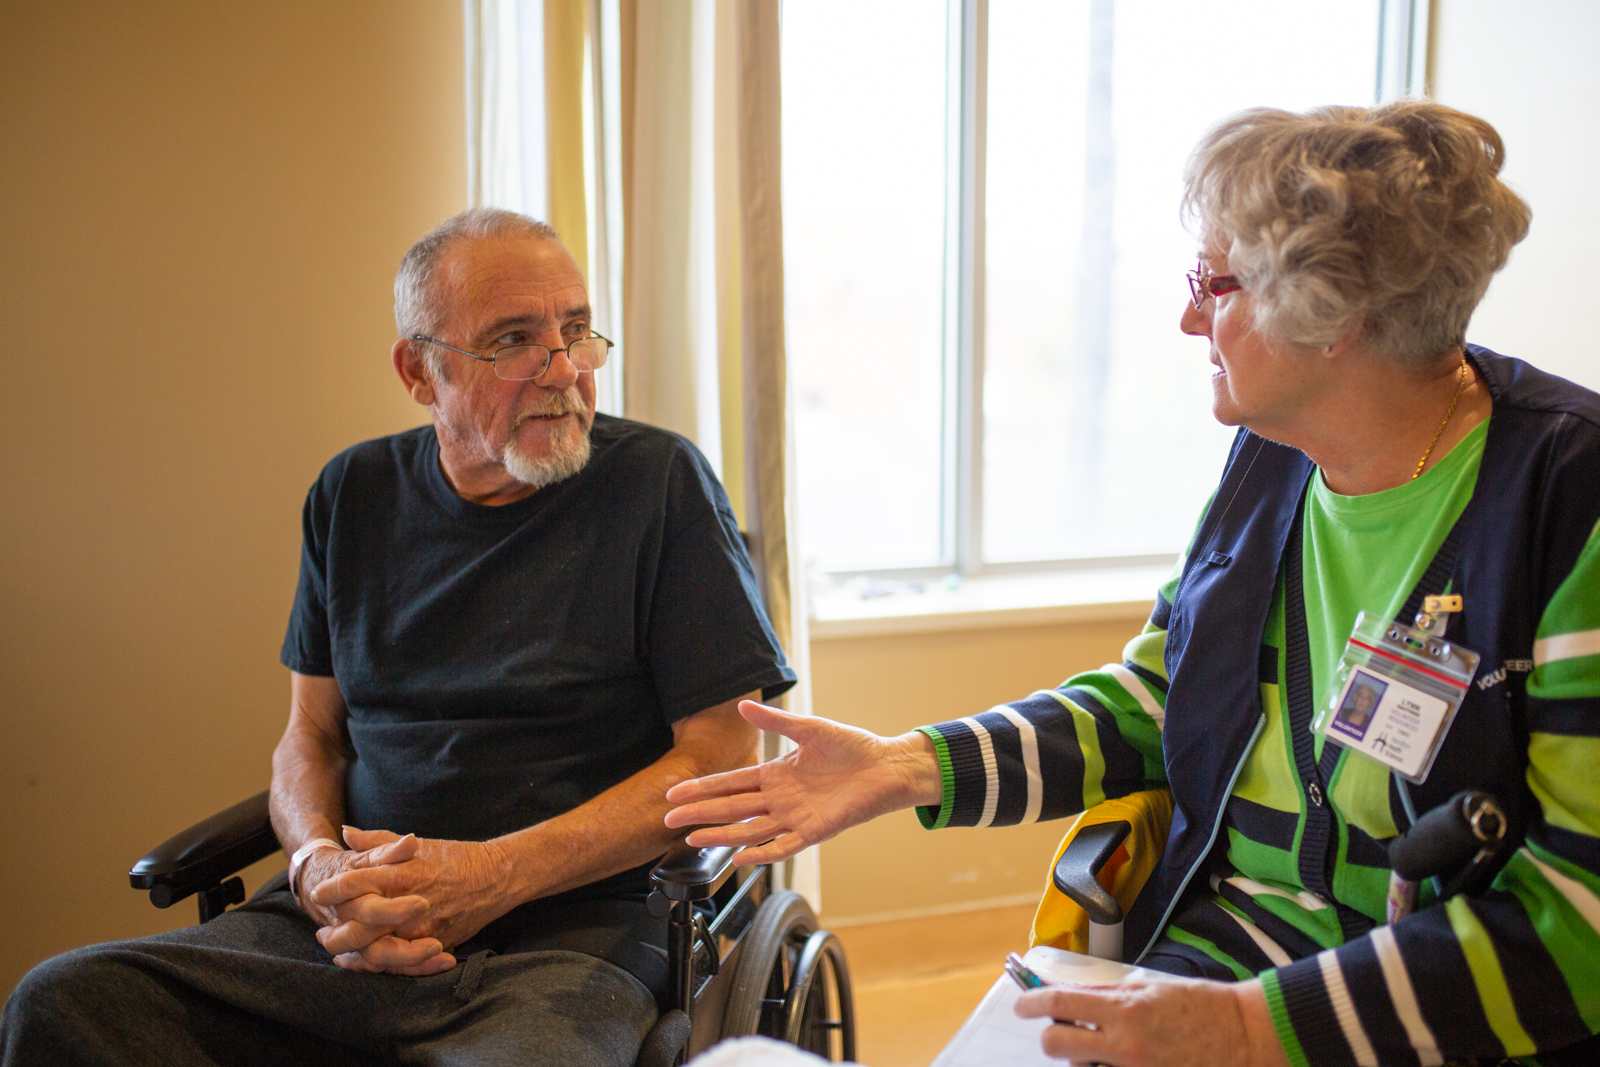 A stroke survivor speaks with a patient in recovery in a hospital room.